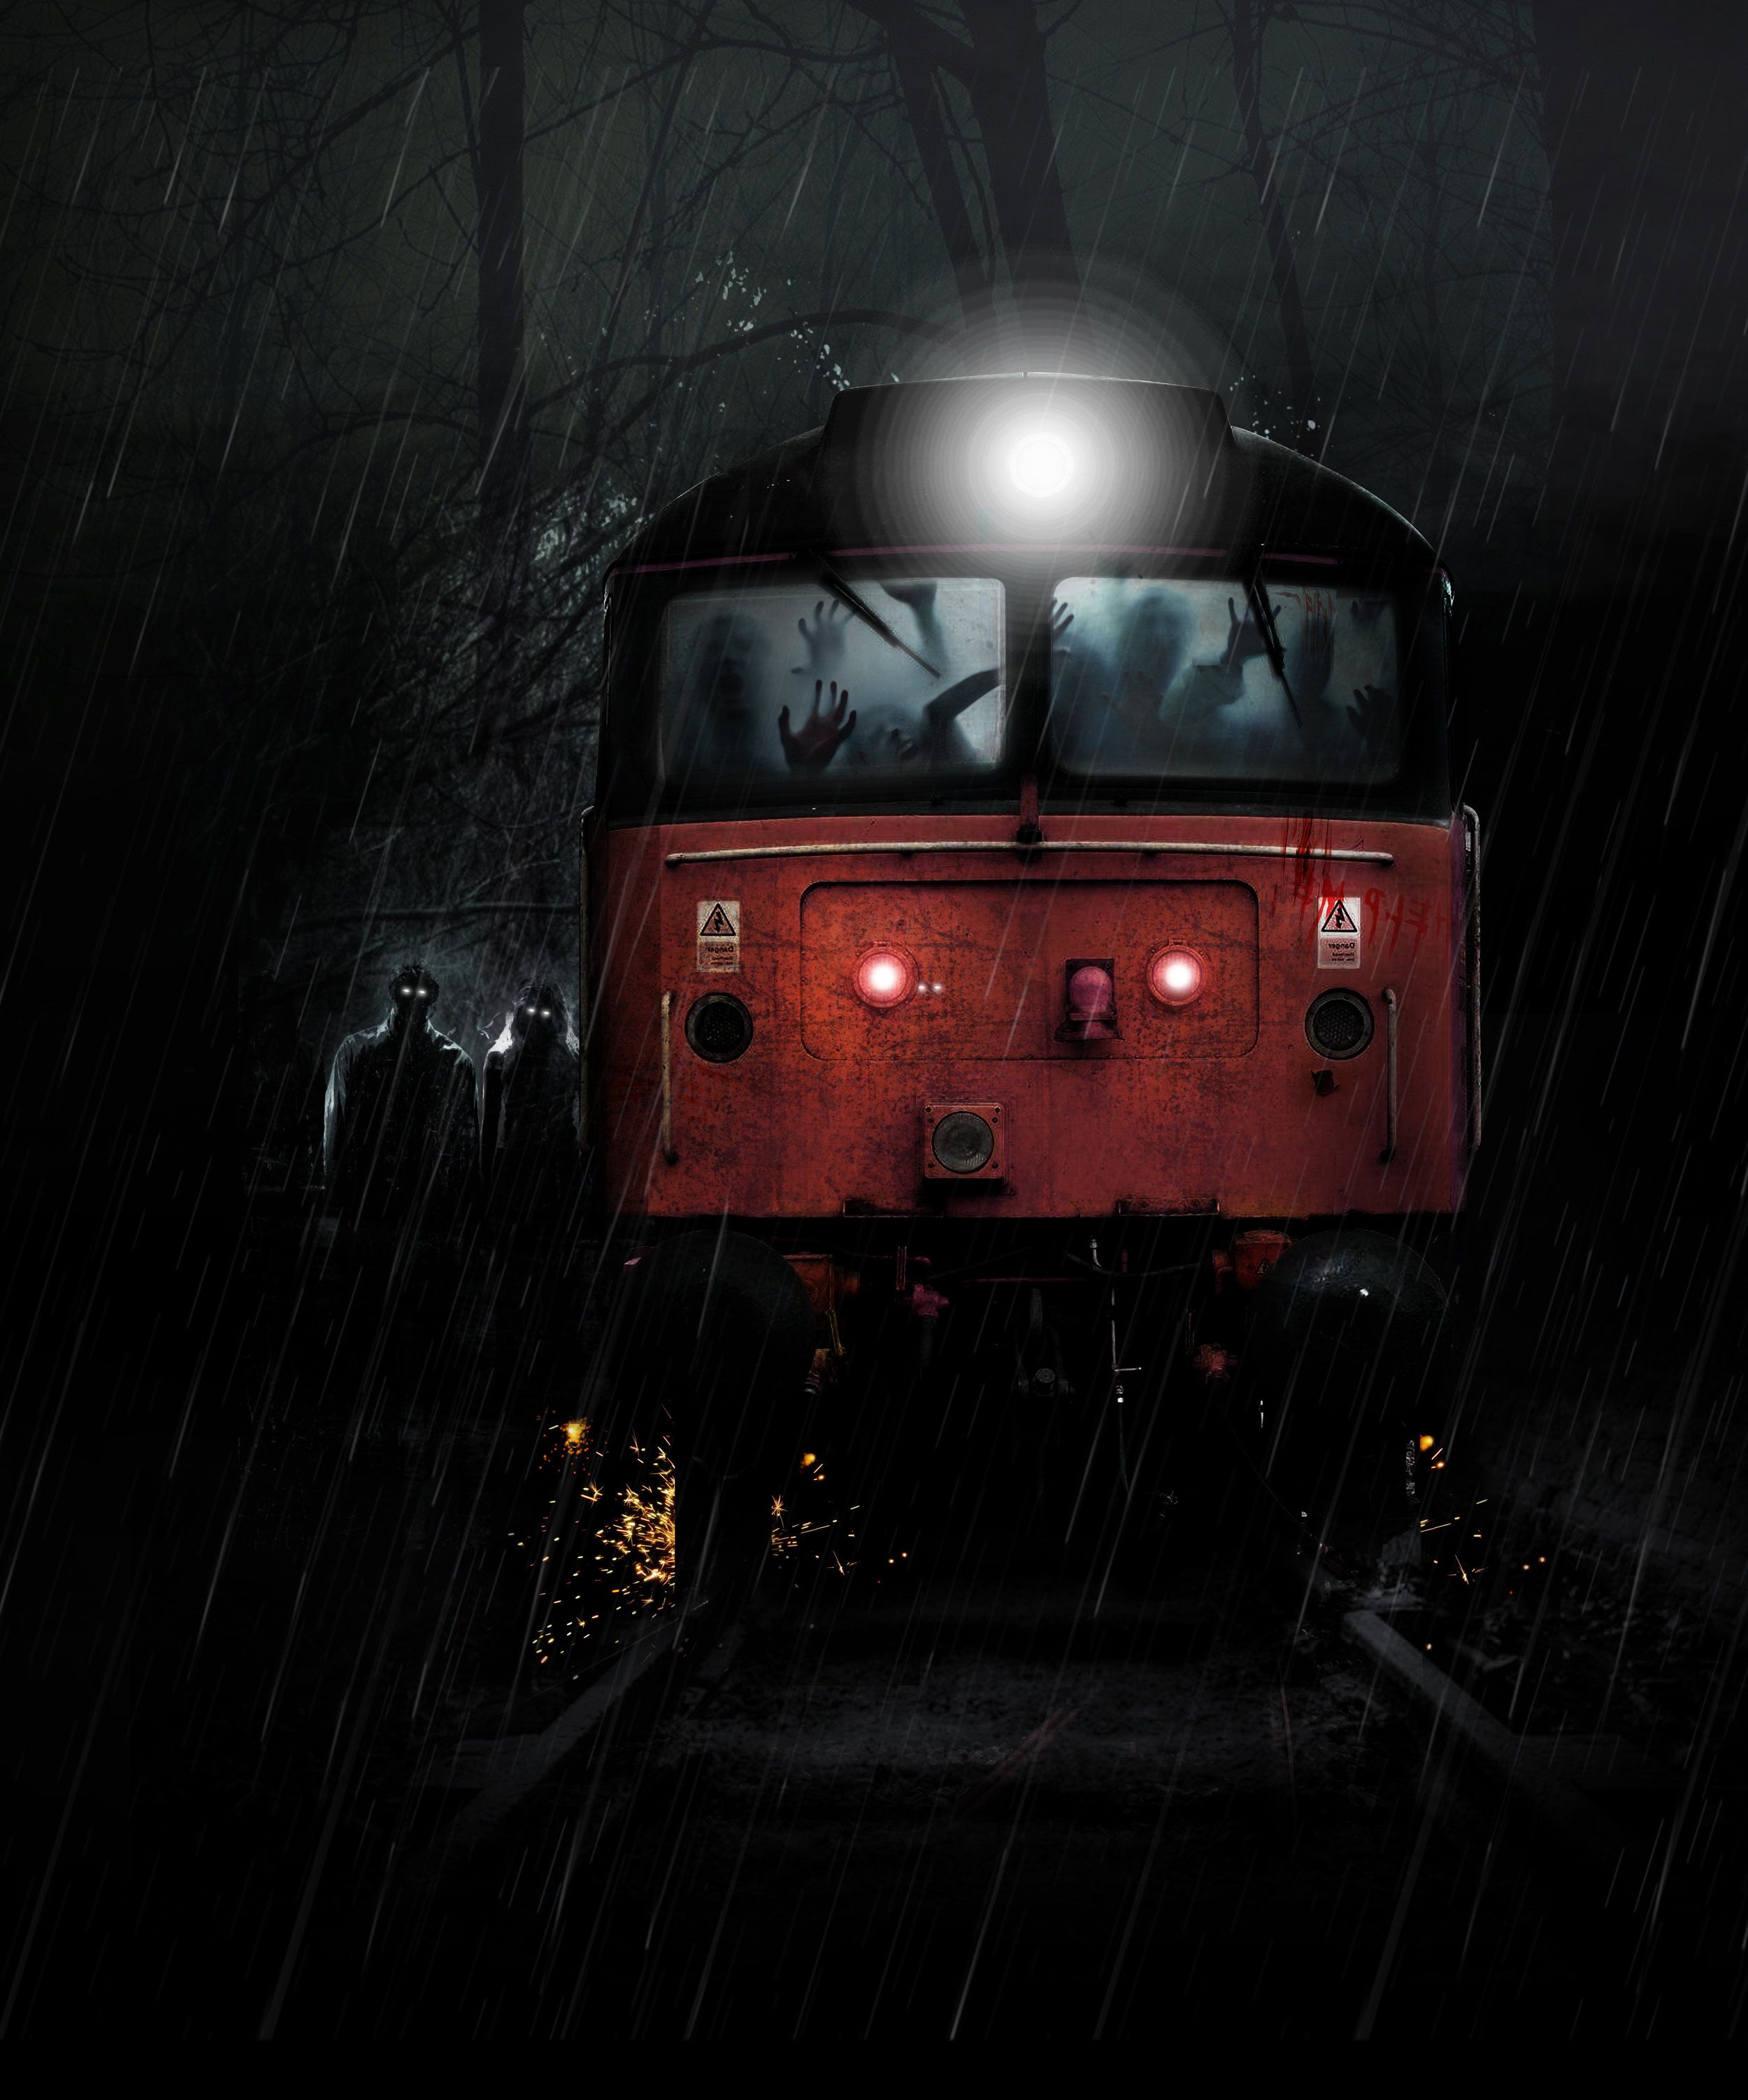 Horror Ghost Train Reviews Reinvented. Train wallpaper, Scary wallpaper, Train